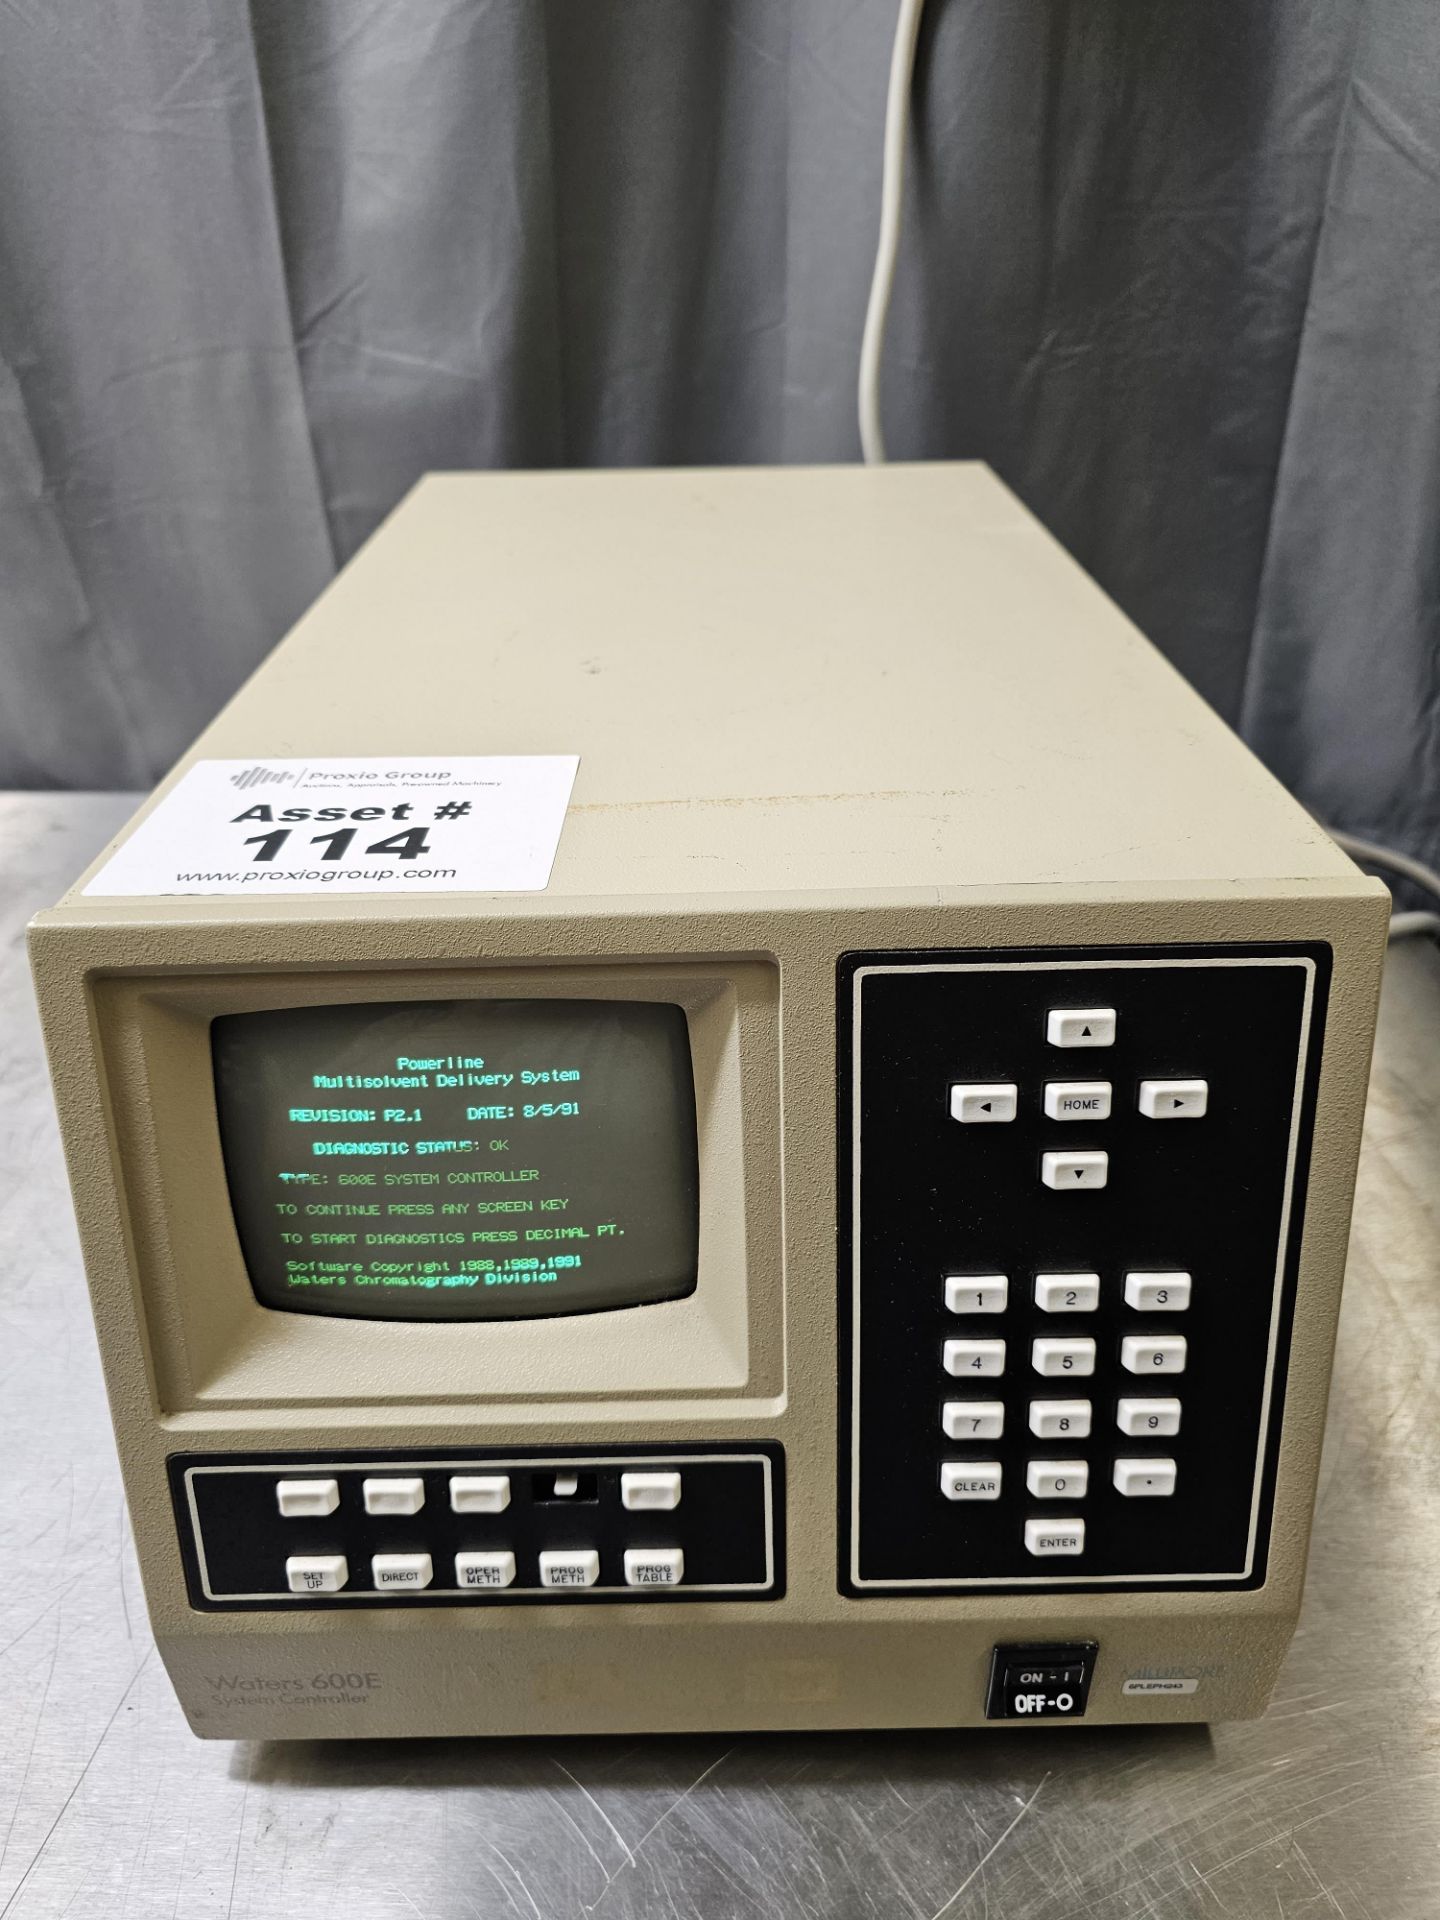 Waters Model 600E Multisolvent Delivery System Controller sn 6PHELPH243 Bldg Loc: Location 6 This - Image 2 of 5